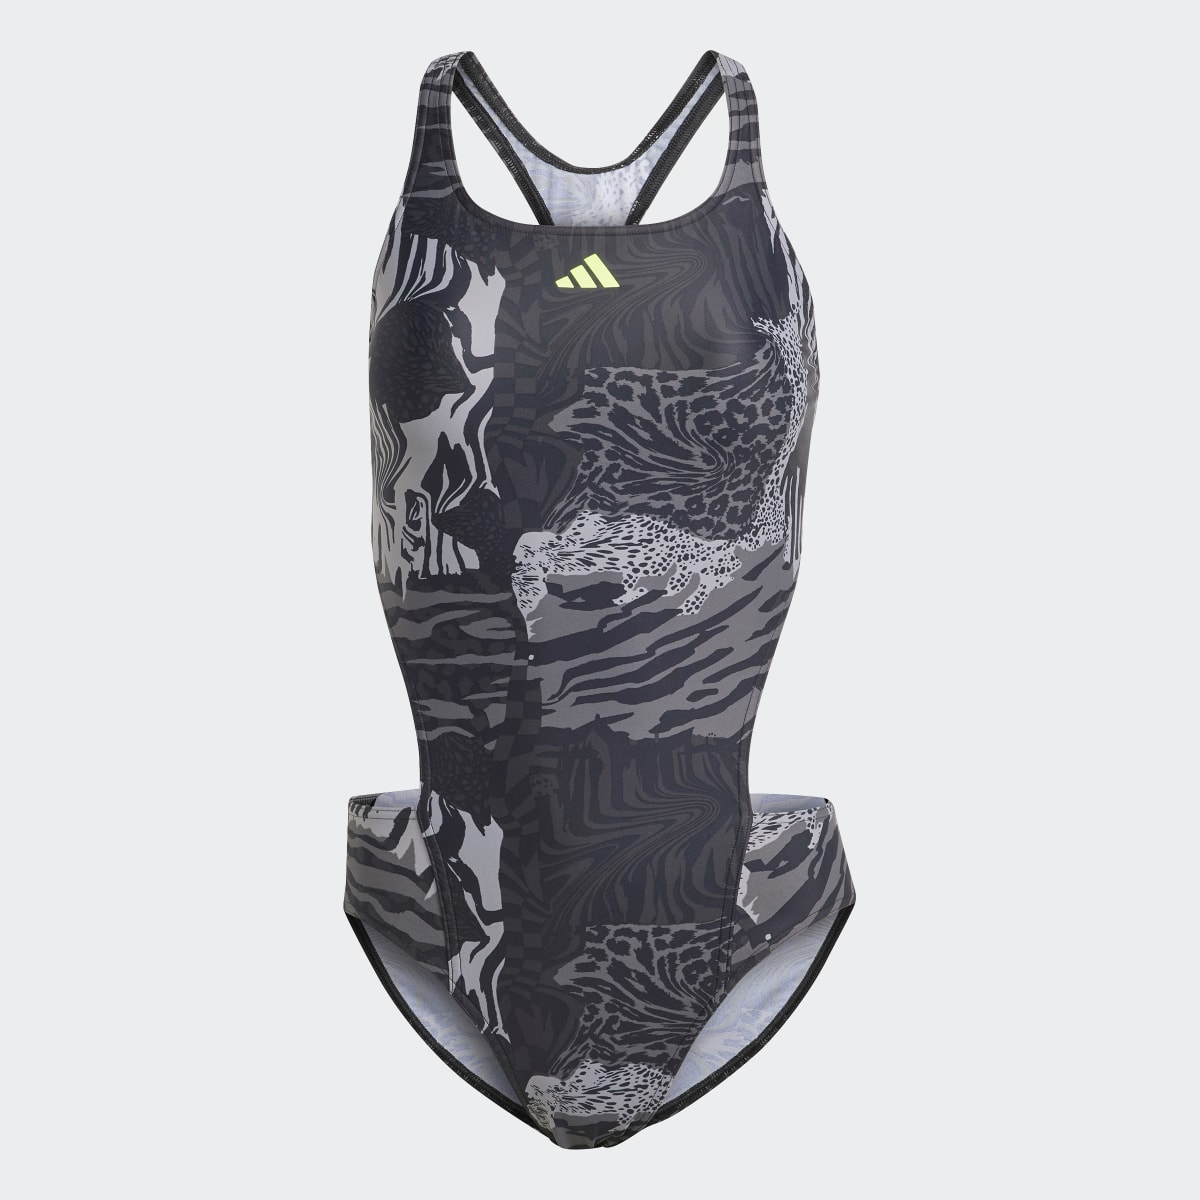 Adidas Allover Graphic Swimsuit. 6